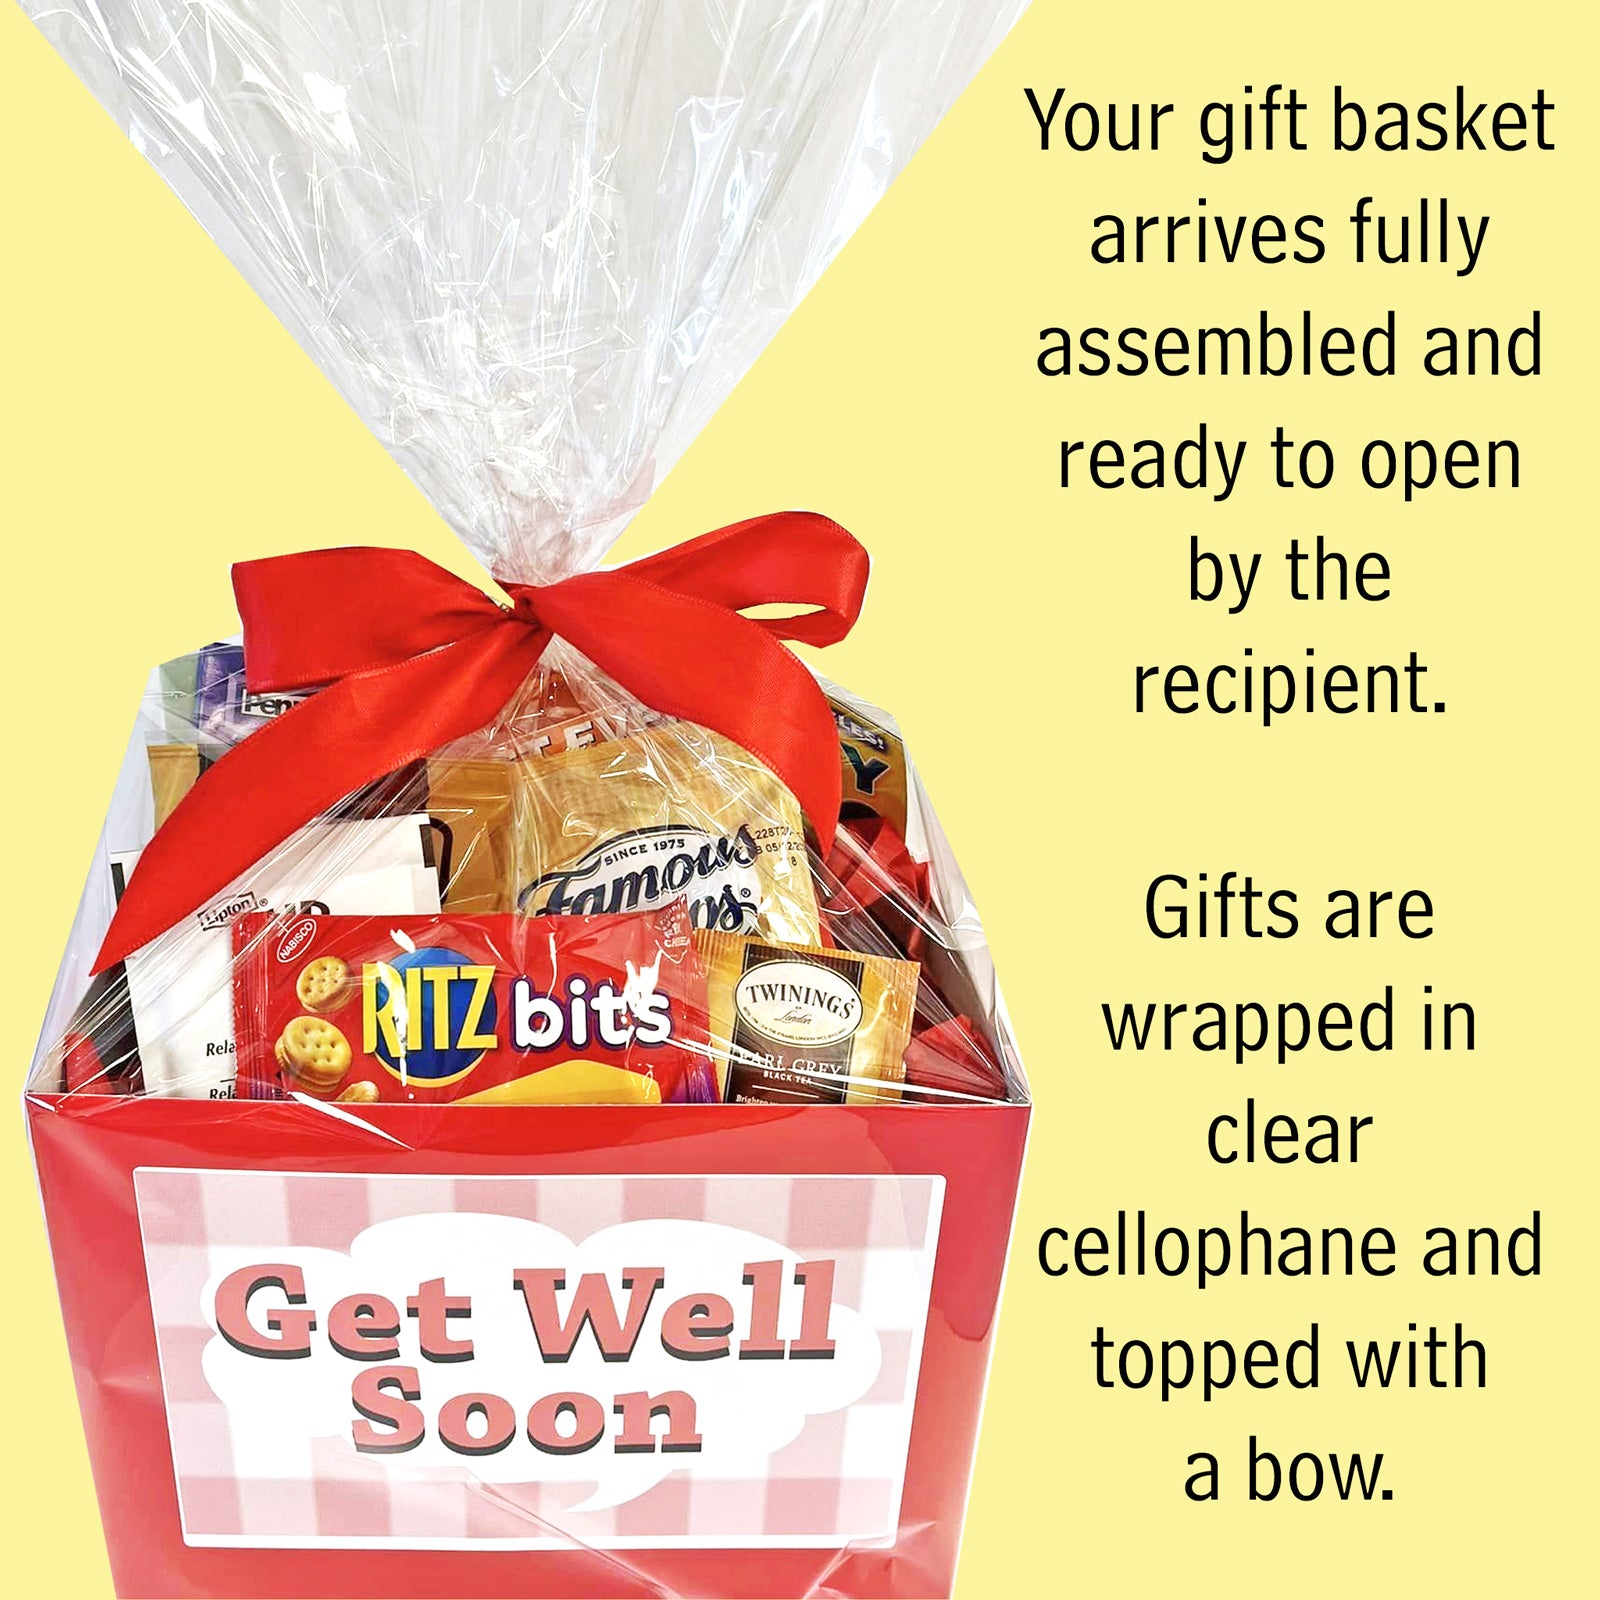 Get Well Soon Gifts for Women - Care Package for Women - After Surgery  Gifts Feel Better Gifts Thinking of You Gifts for Women, Sympathy Gift  Baskets